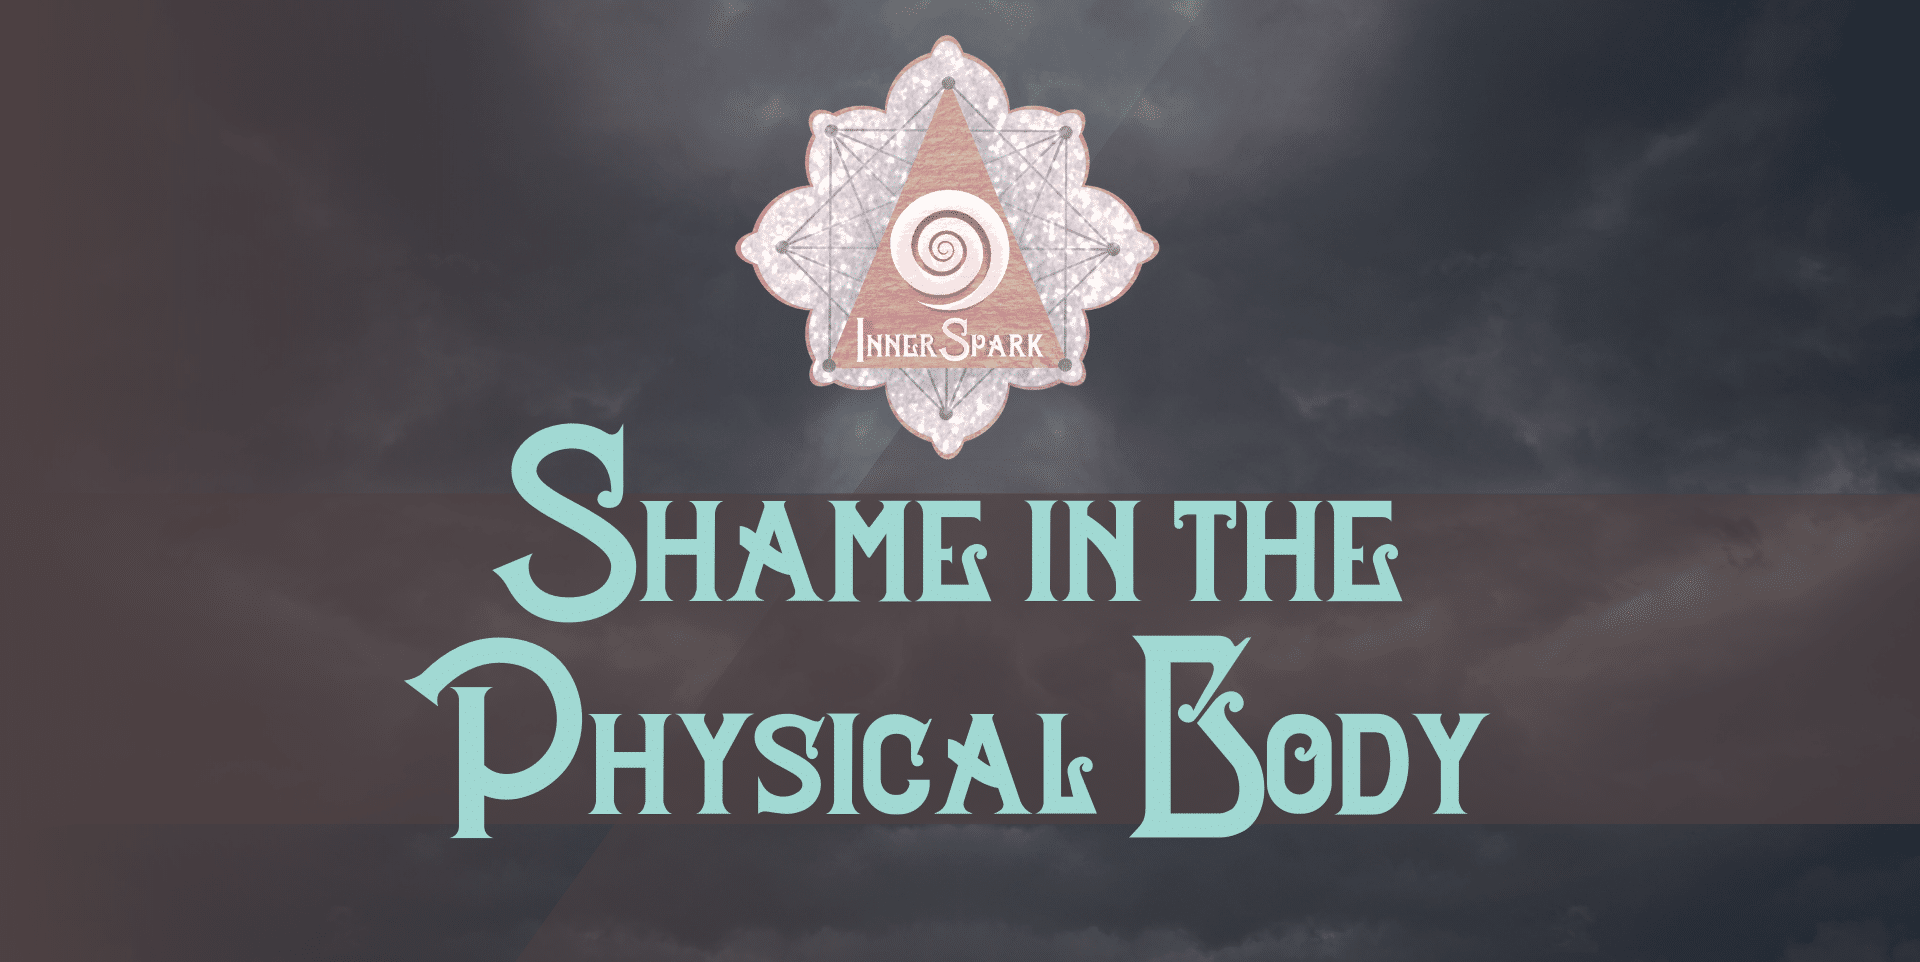 Shame in the Physical Body: Symptoms & Dis-Eases Associated with Shame